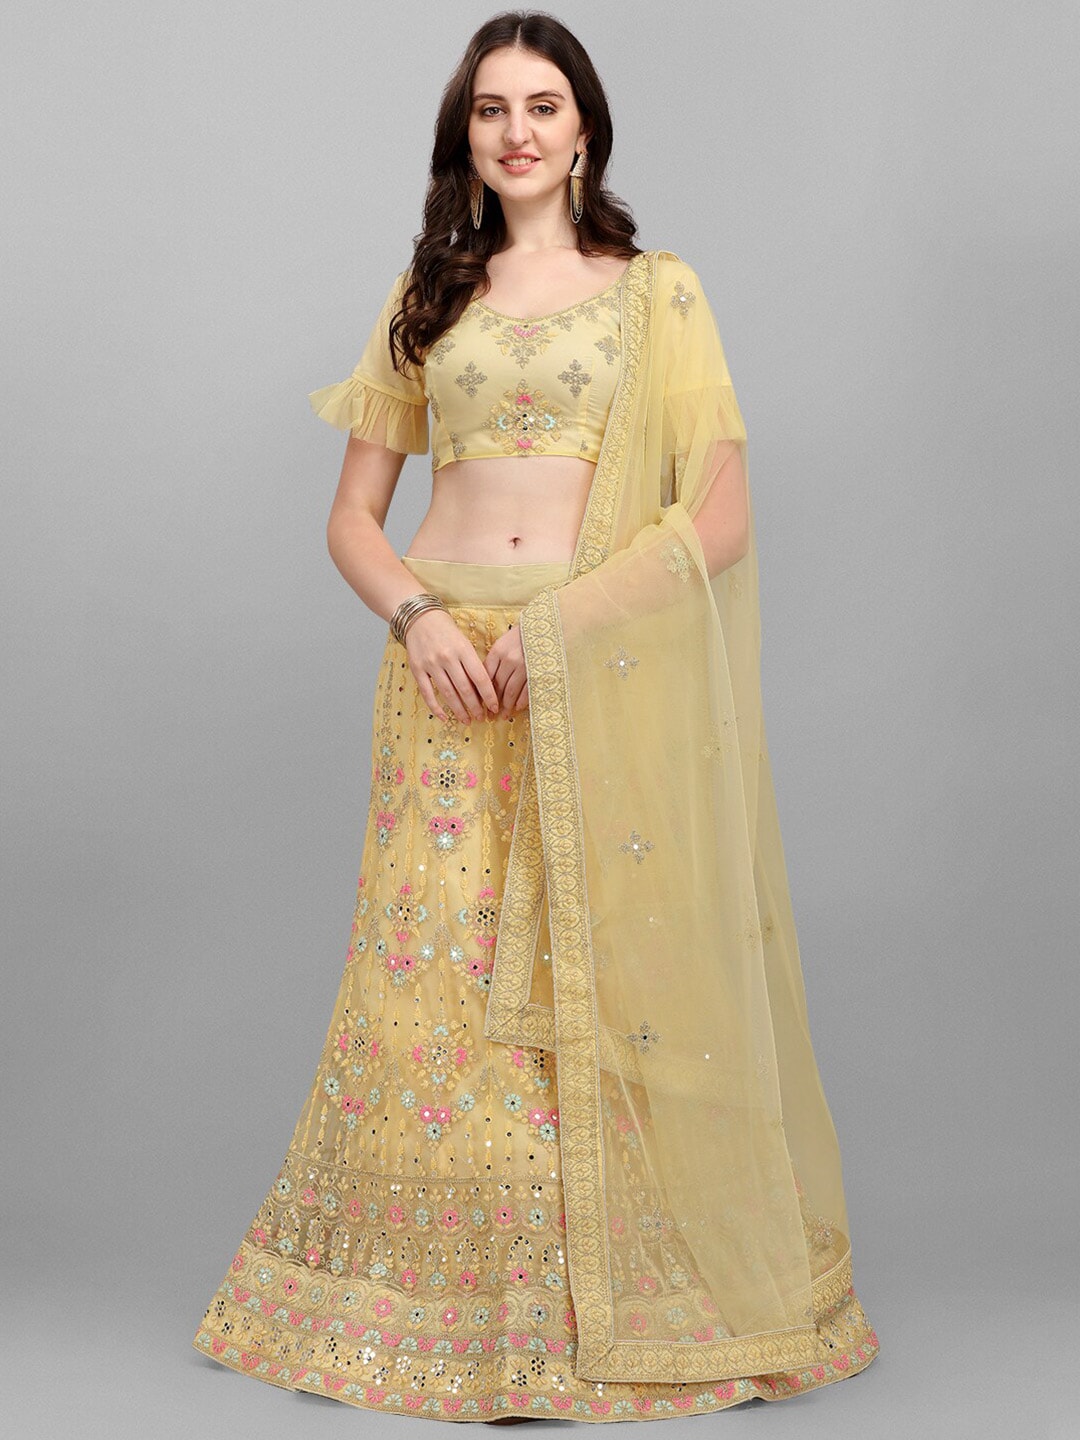 V SALES Yellow & Pink Embroidered Mirror Work Semi-Stitched Lehenga Set Price in India